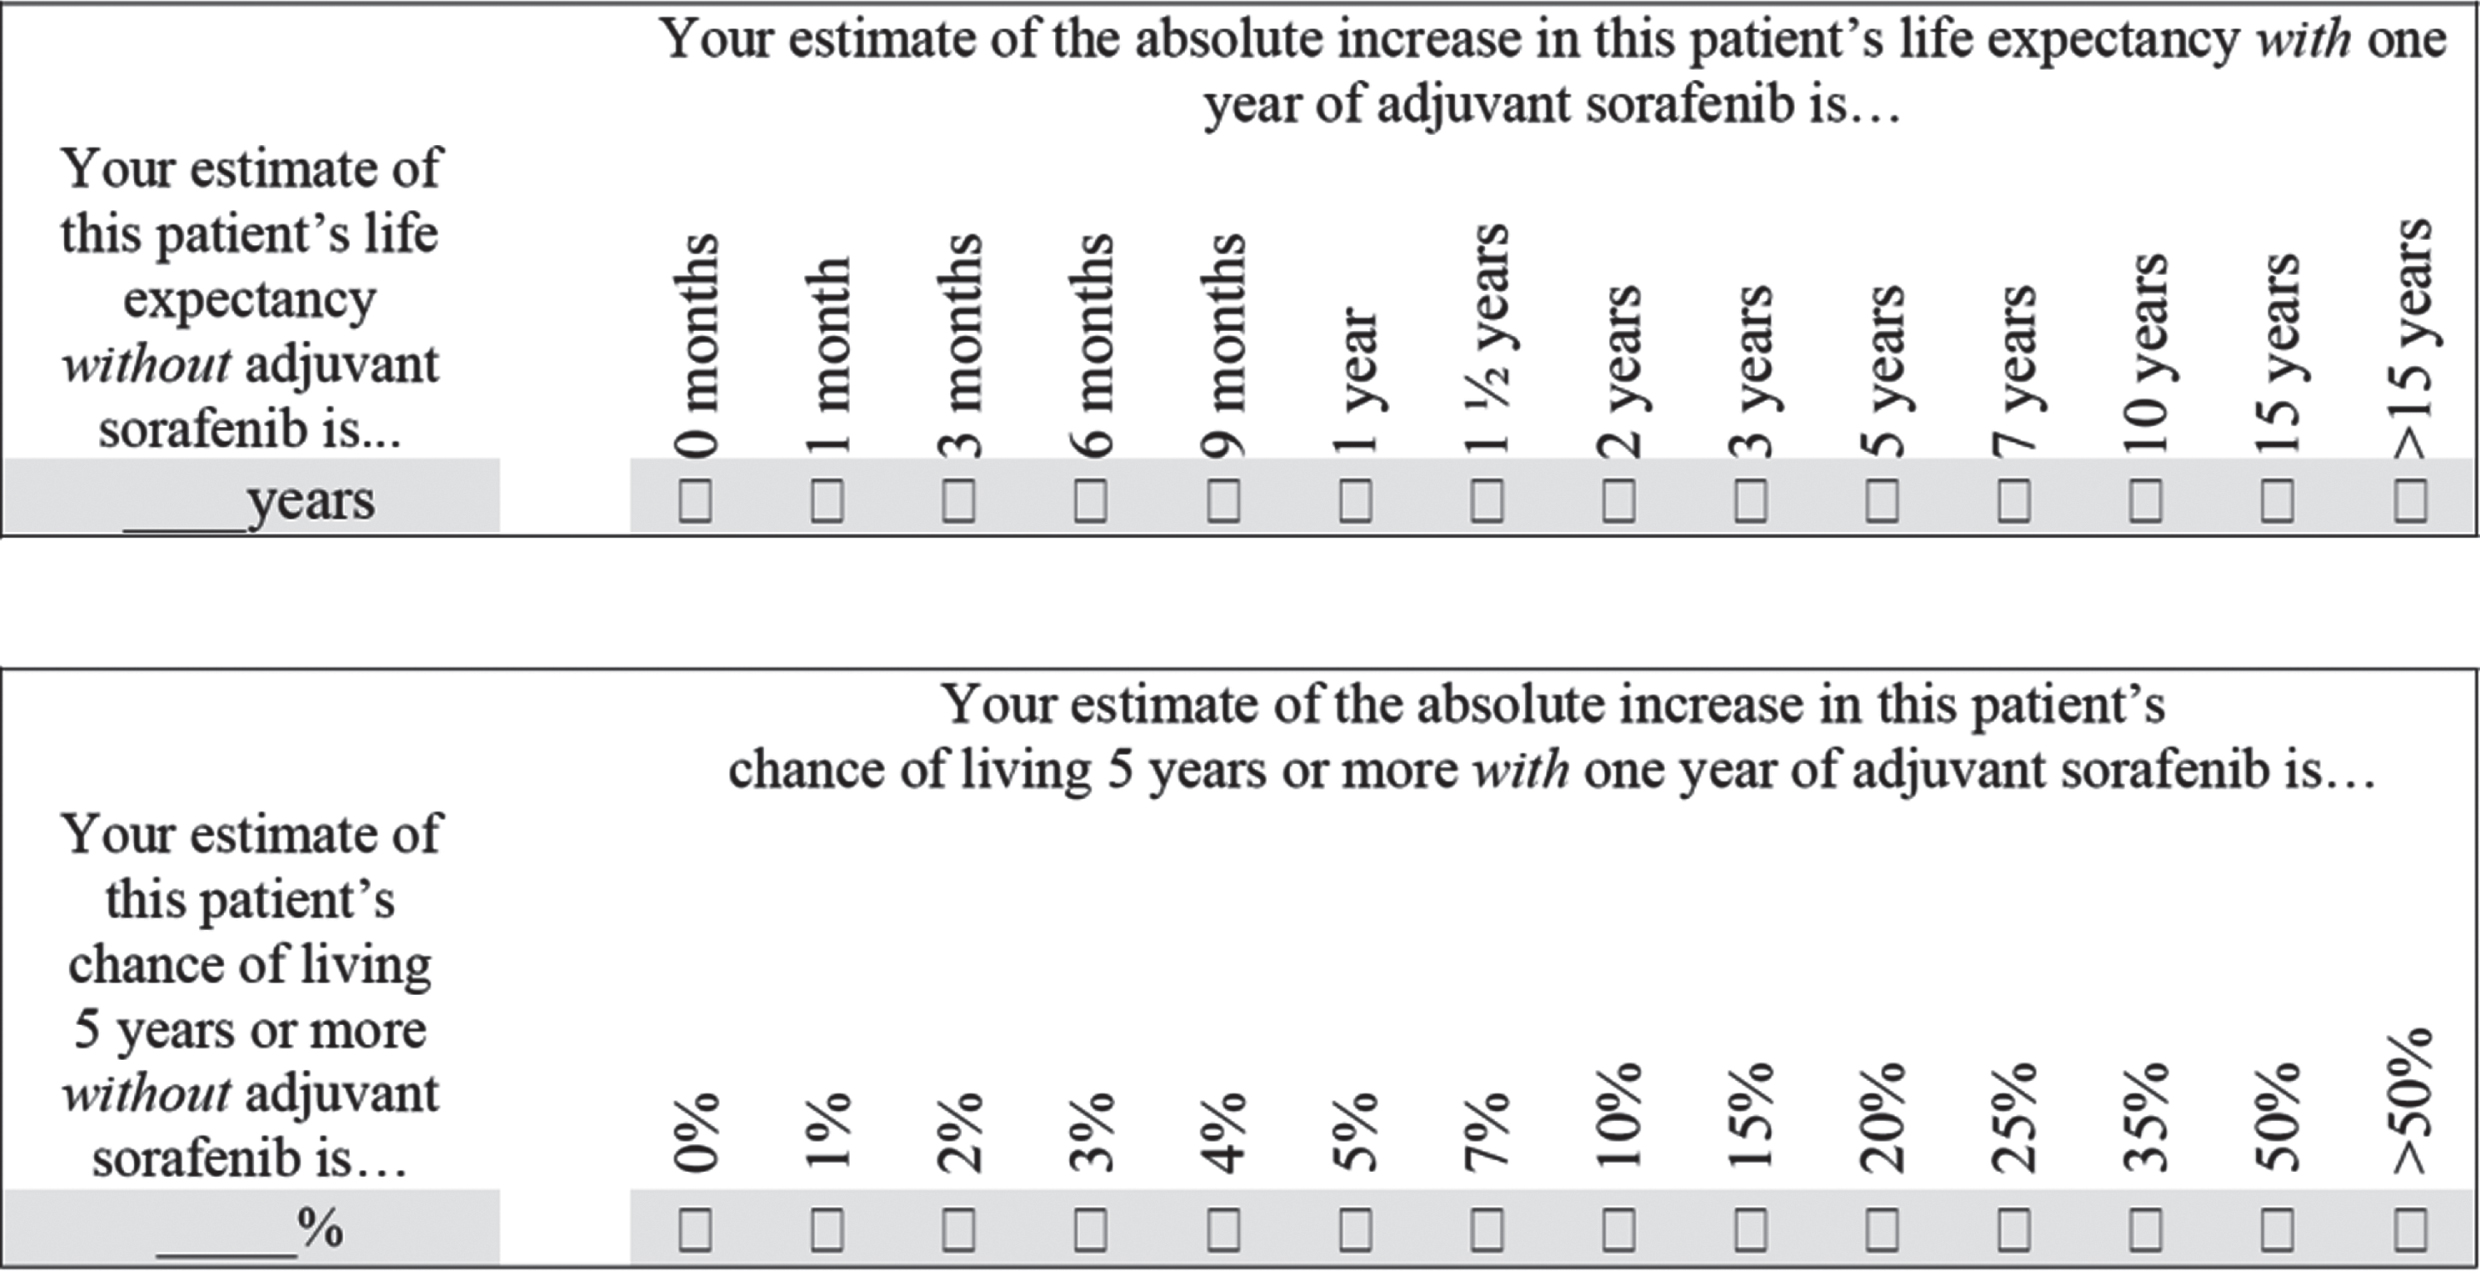 Questions completed by clinicians at baseline for each patient regarding their predicted prognosis with and without adjuvant sorafenib.